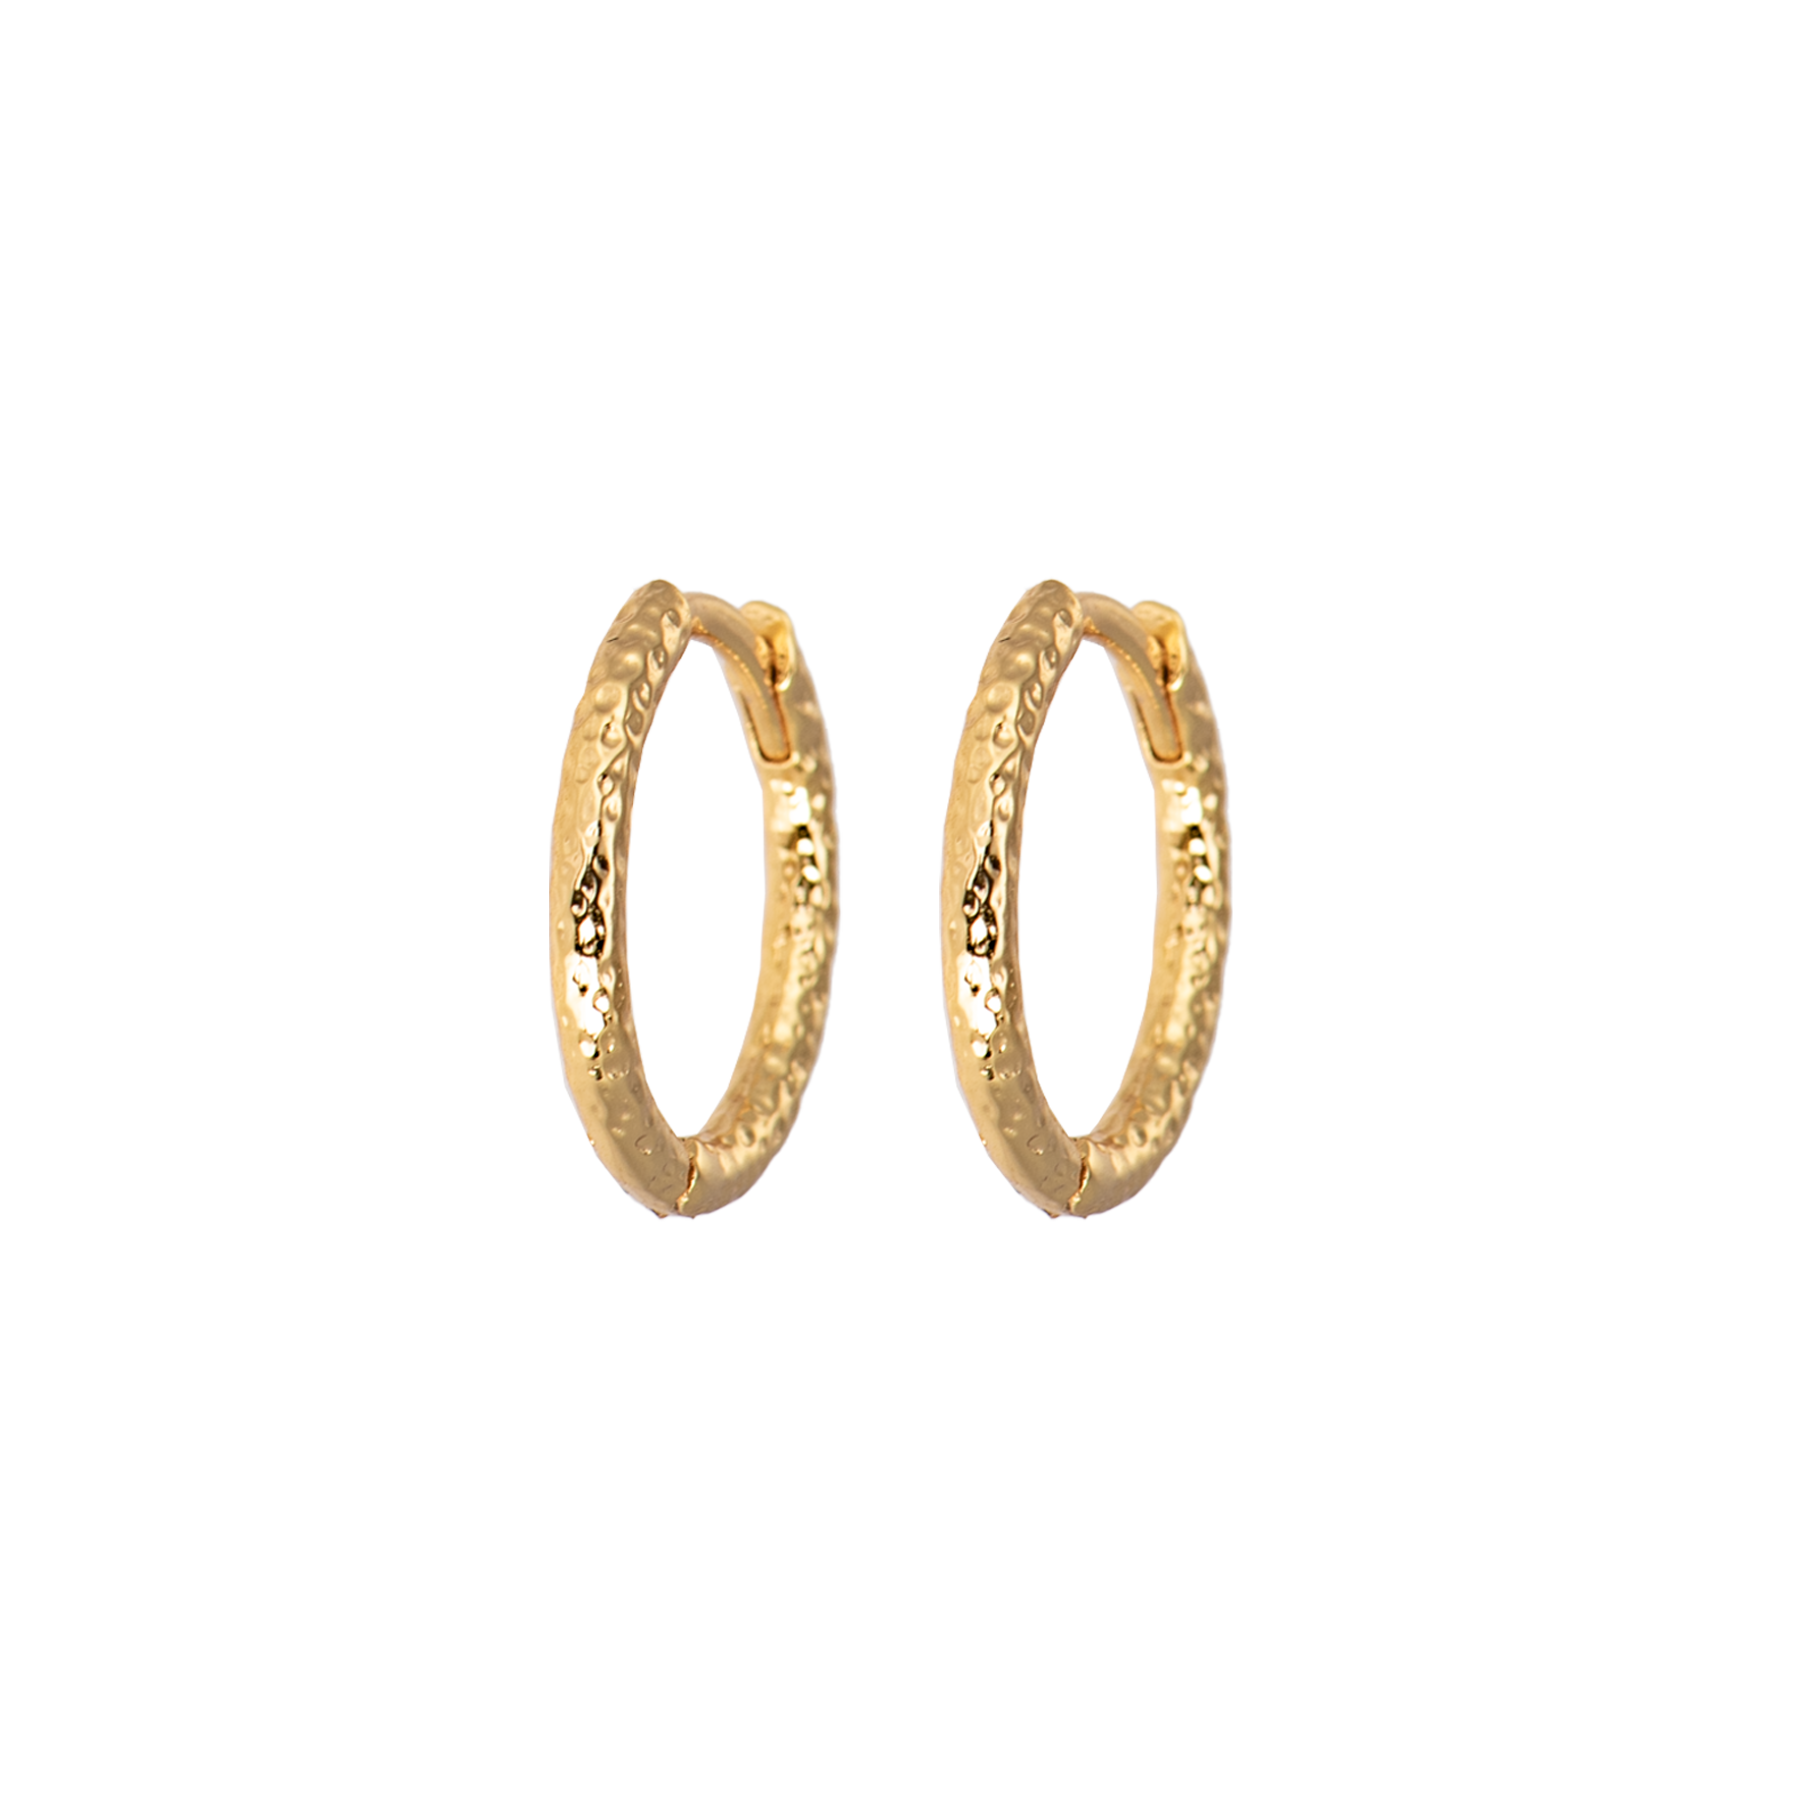 Image of Medium hammered gold hoops  from Emilia by Bon Dep